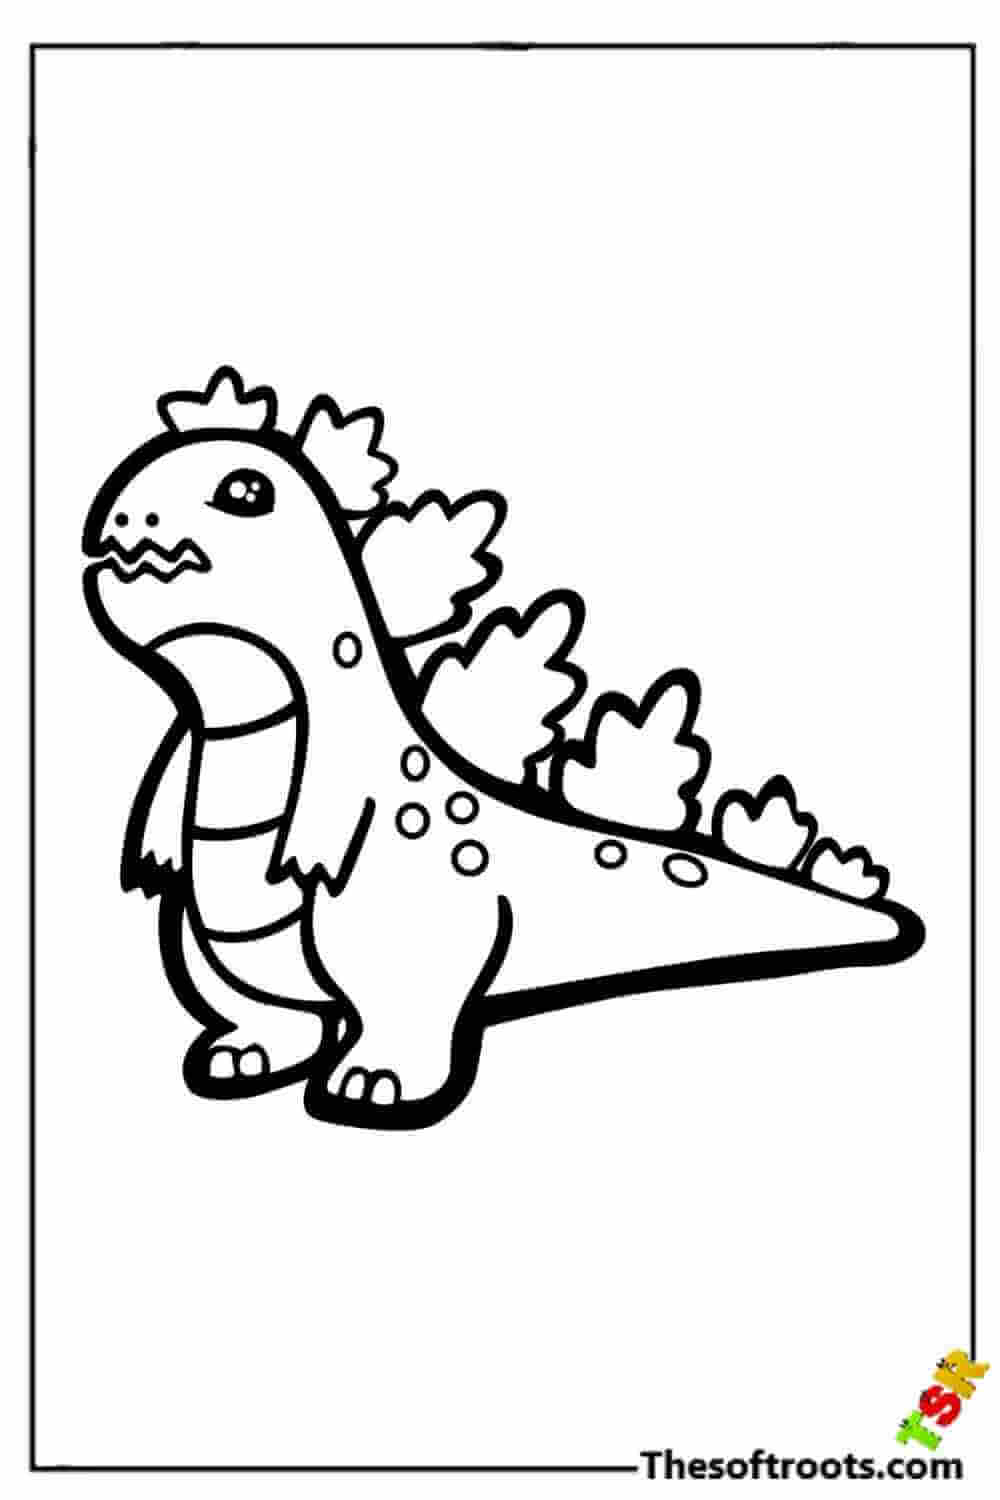 Cute Godzilla coloring pages